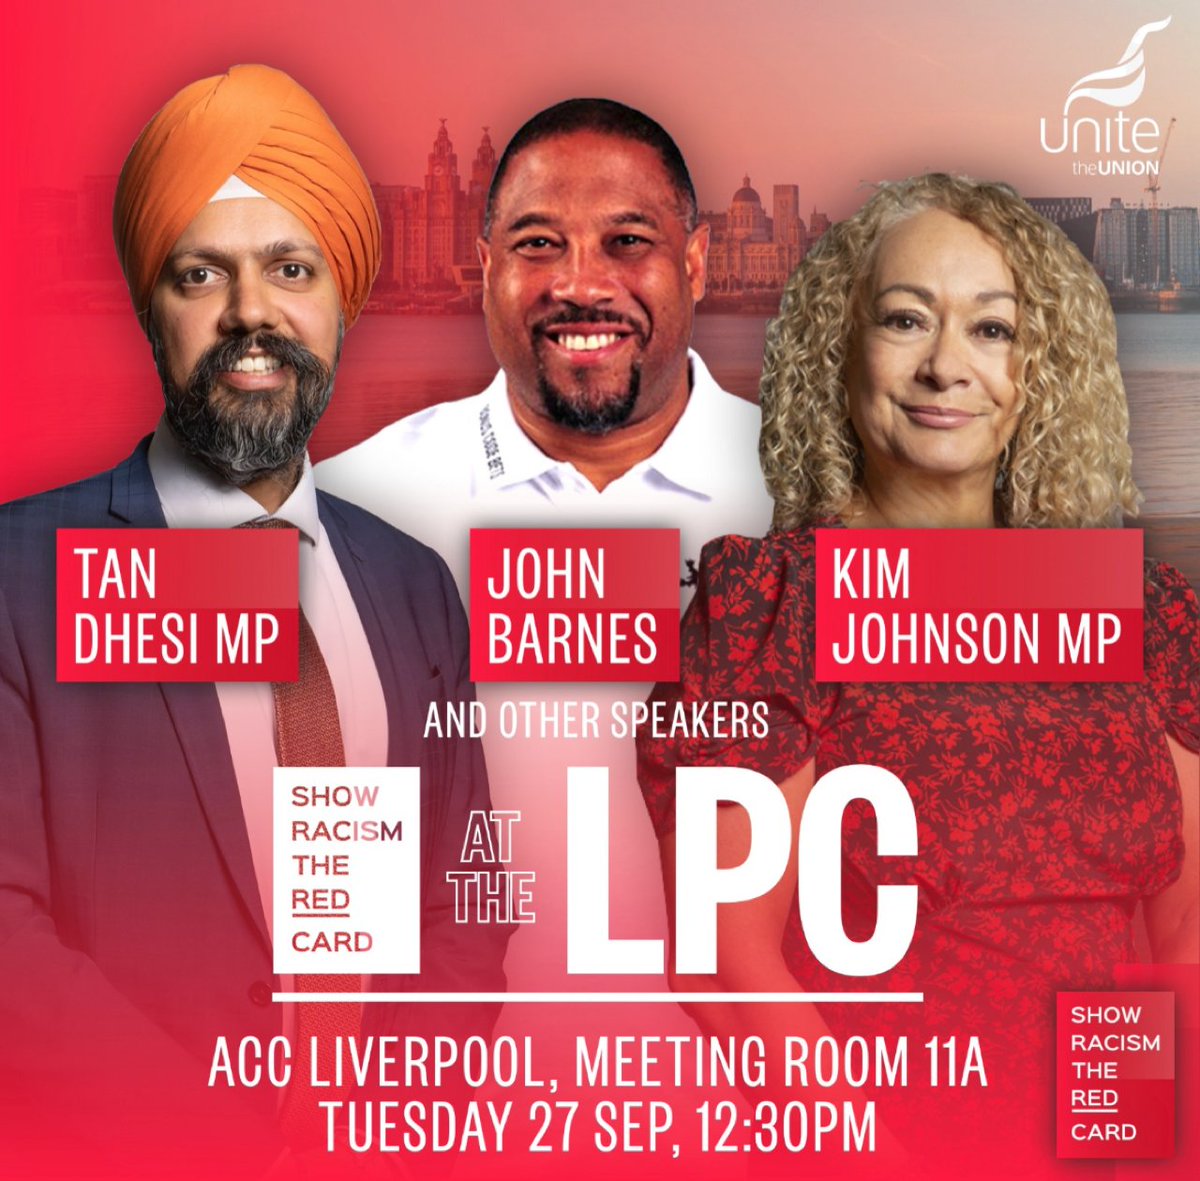 1 day to go until our great line of speakers at the #LabourPartyConference2022 @TanDhesi @officialbarnesy @KimJohnsonMP